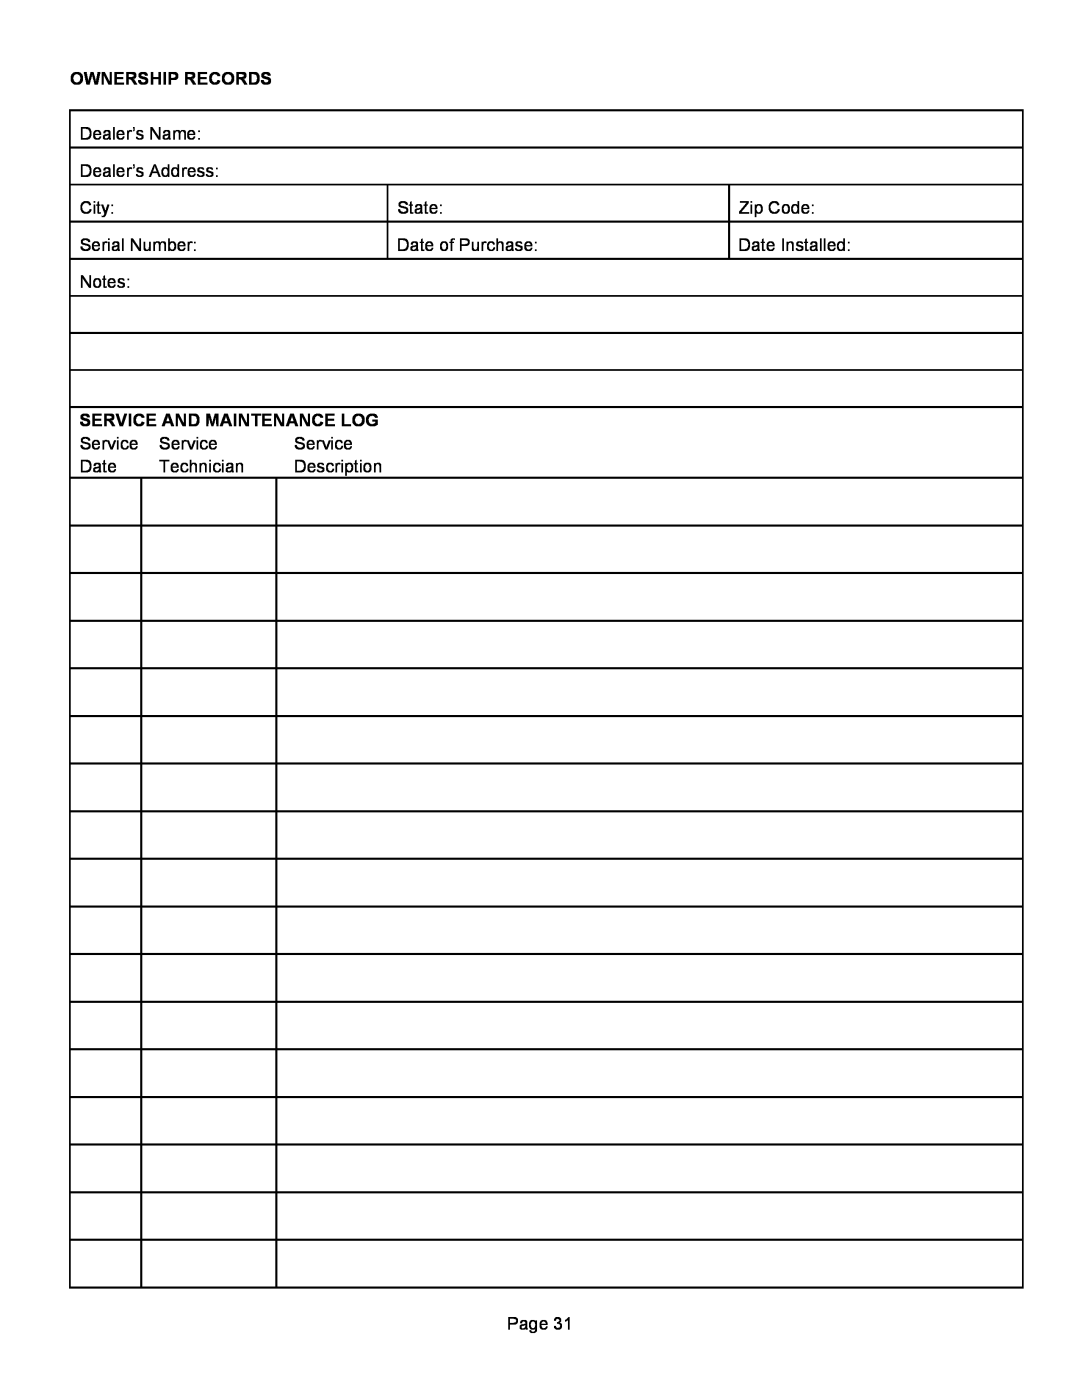 Lennox Hearth 1003C operation manual Ownership Records, Service And Maintenance Log 